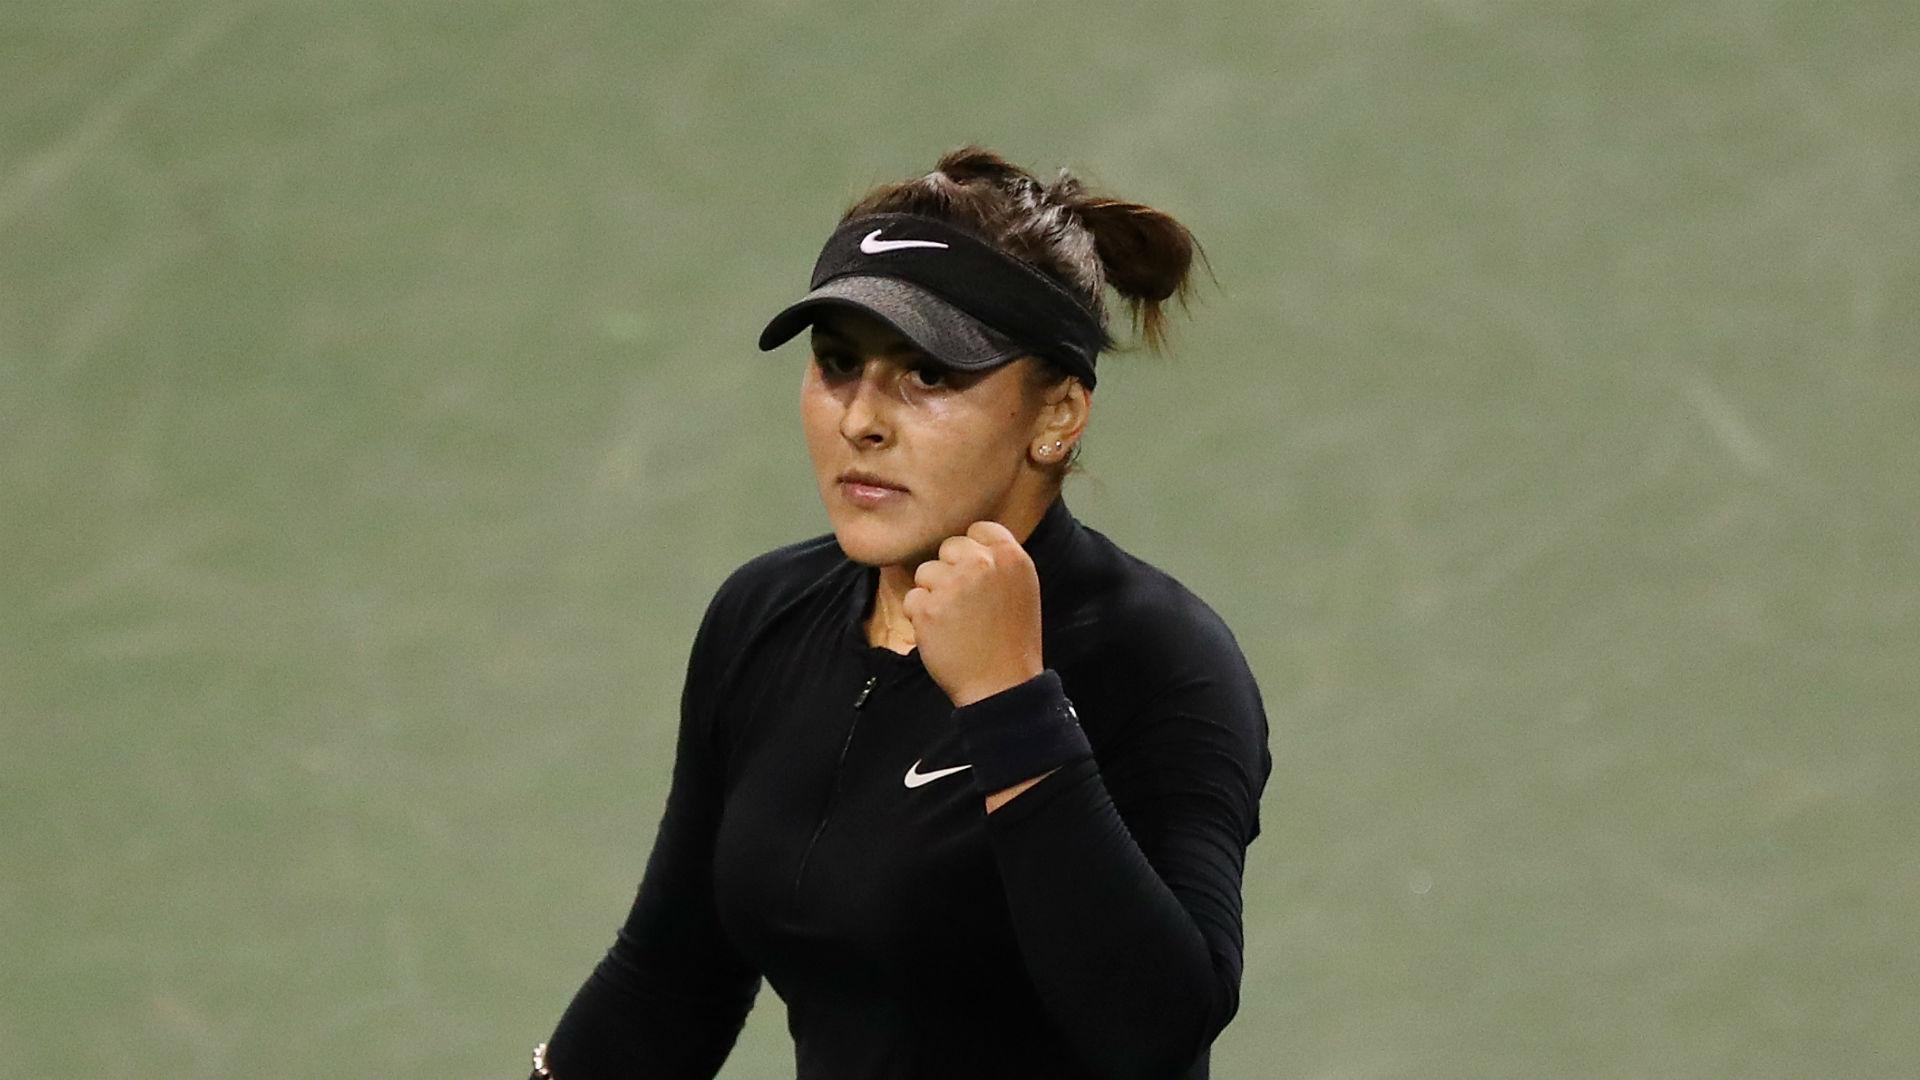 Indian Wells Open final: Who is Bianca Andreescu?